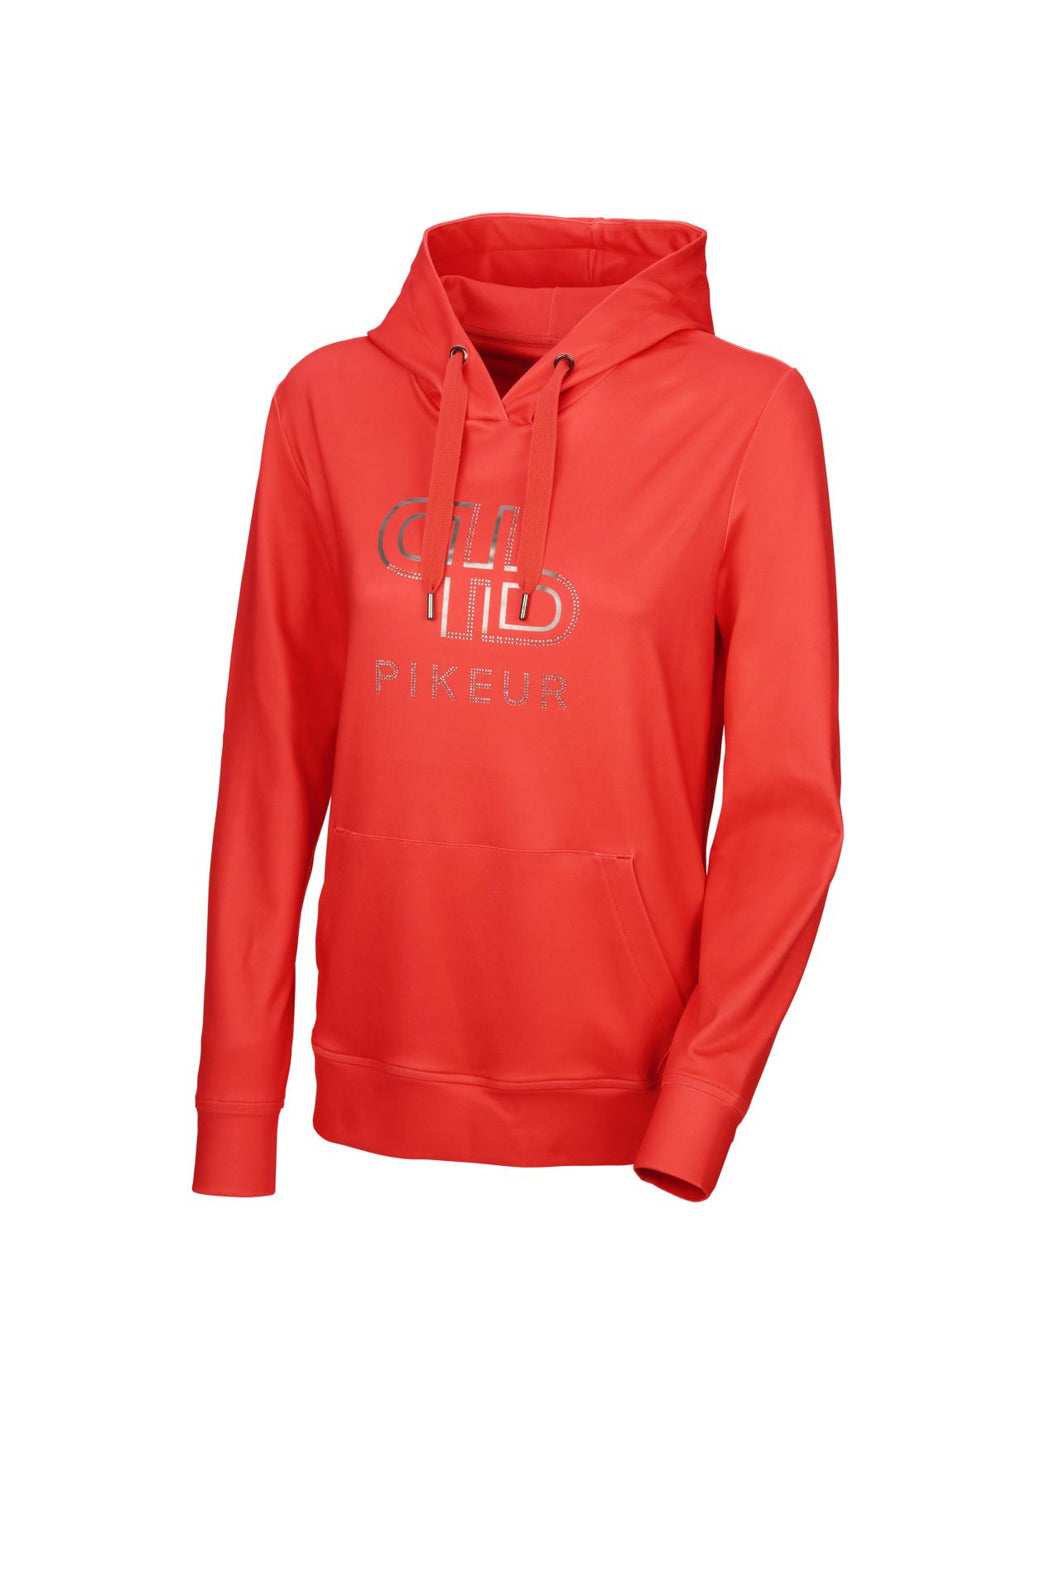 Pikeur Vajessa Hoody Selection S/S 23 coral red